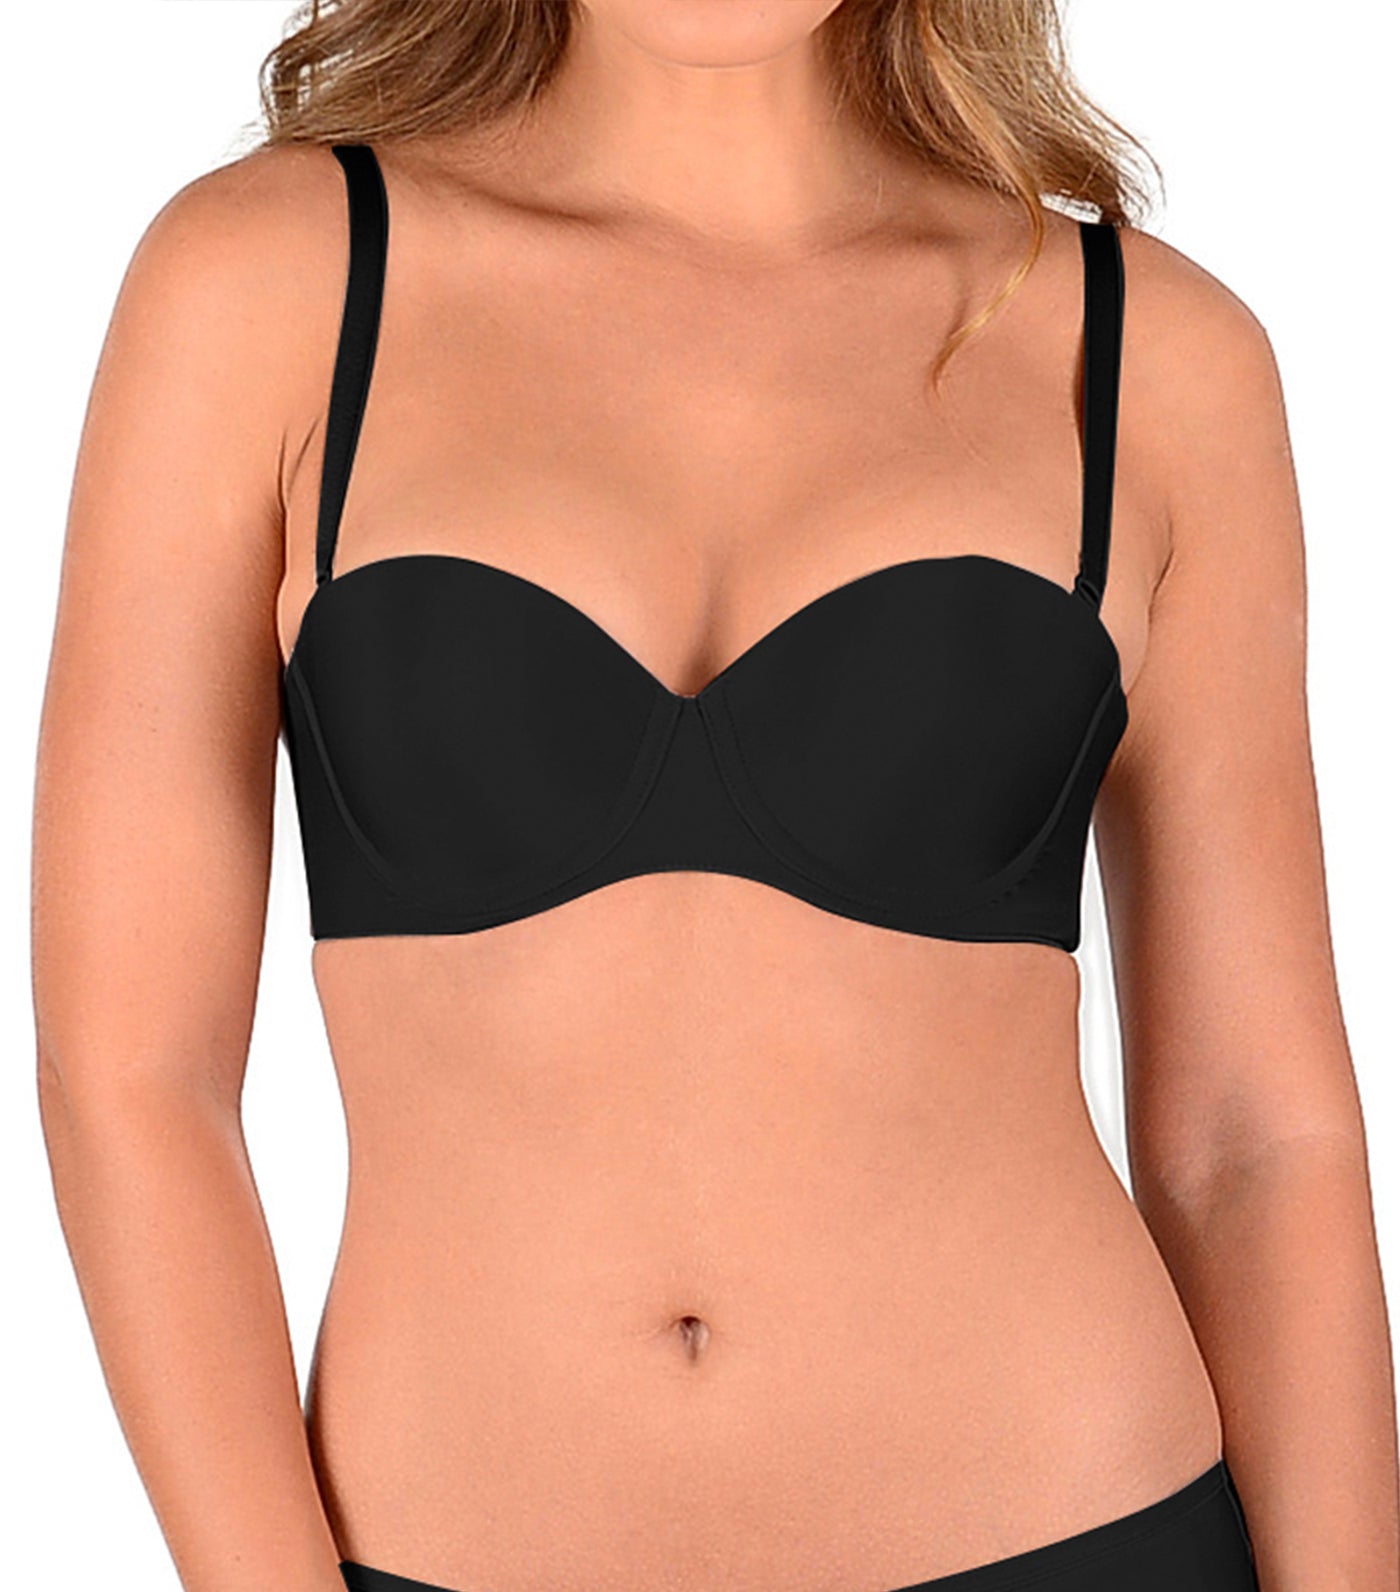 What is a Maximizer Bra? - WOO